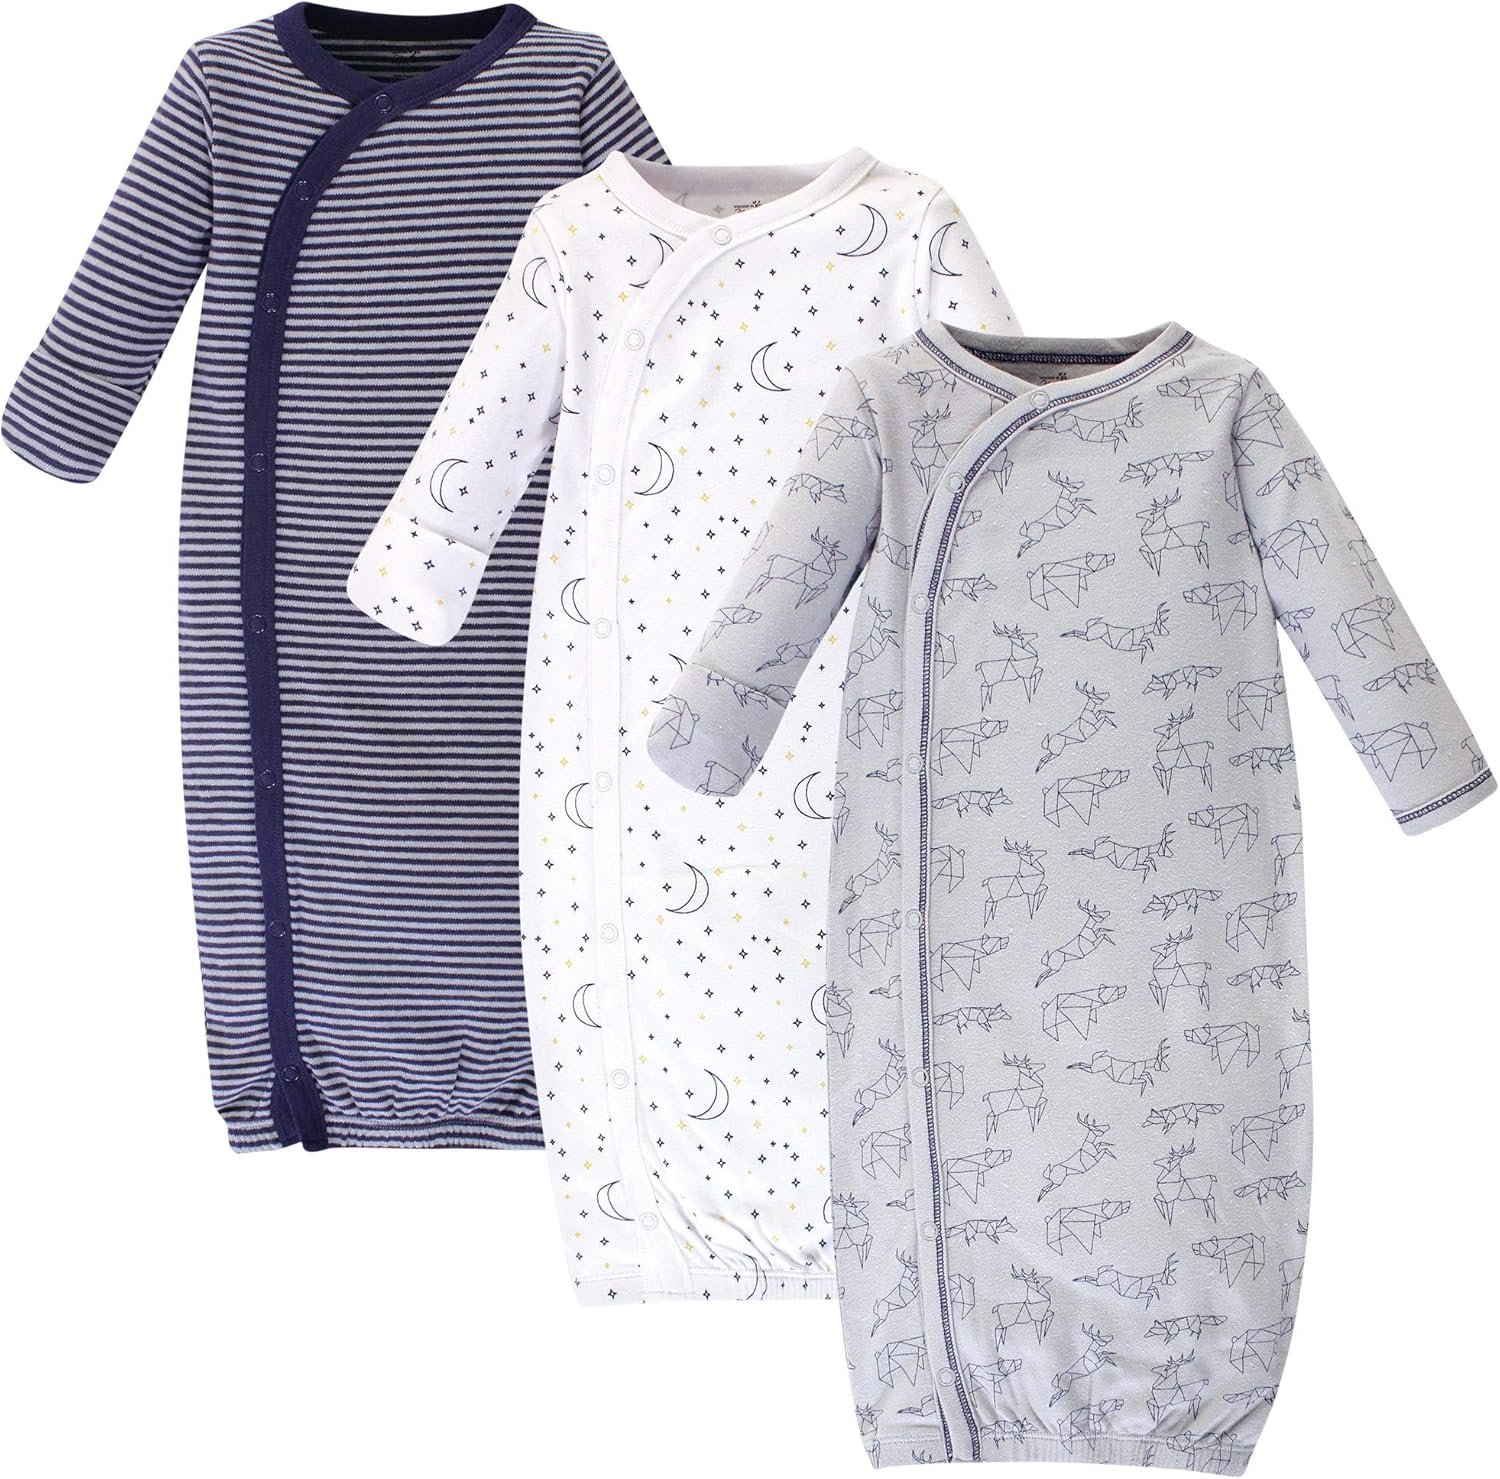 Touched by Nature Baby Girls’ Organic Cotton Kimono Gowns Review